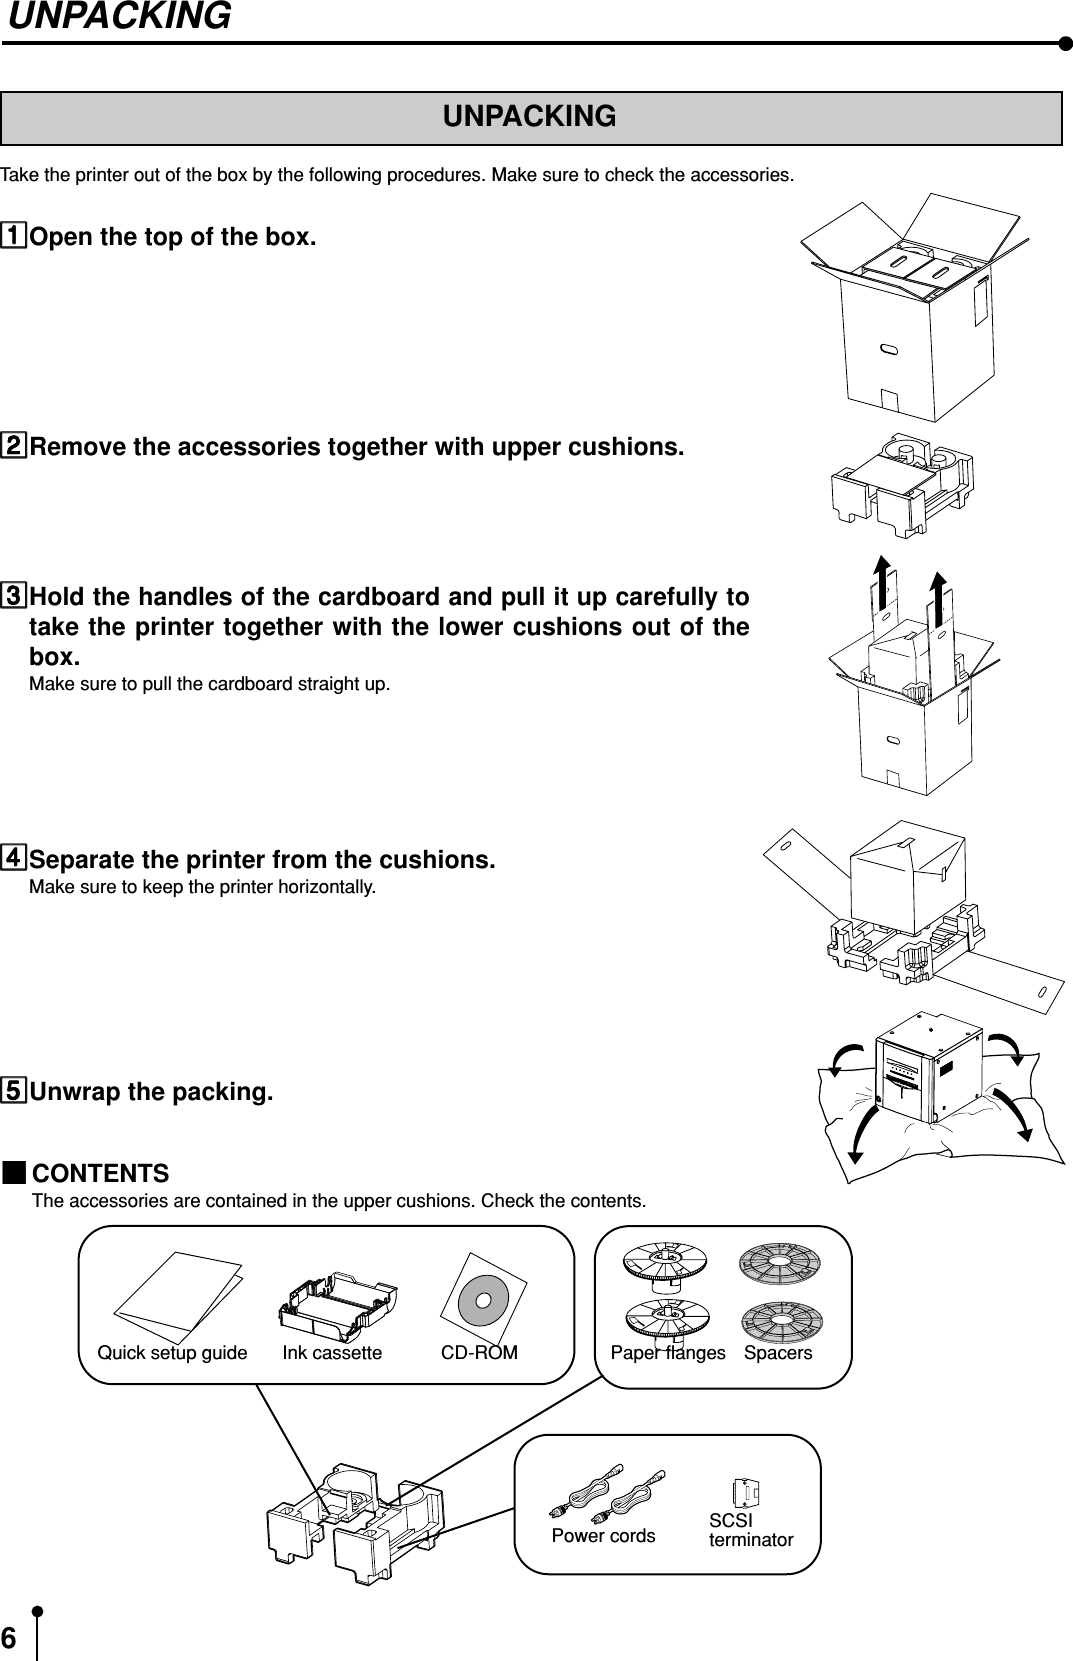 6UNPACKINGUNPACKINGTake the printer out of the box by the following procedures. Make sure to check the accessories.Open the top of the box.Remove the accessories together with upper cushions.Hold the handles of the cardboard and pull it up carefully totake the printer together with the lower cushions out of thebox.Make sure to pull the cardboard straight up.Separate the printer from the cushions.Make sure to keep the printer horizontally.Unwrap the packing.CONTENTSThe accessories are contained in the upper cushions. Check the contents.Quick setup guide Ink cassette CD-ROM Paper flanges SpacersPower cords SCSIterminator